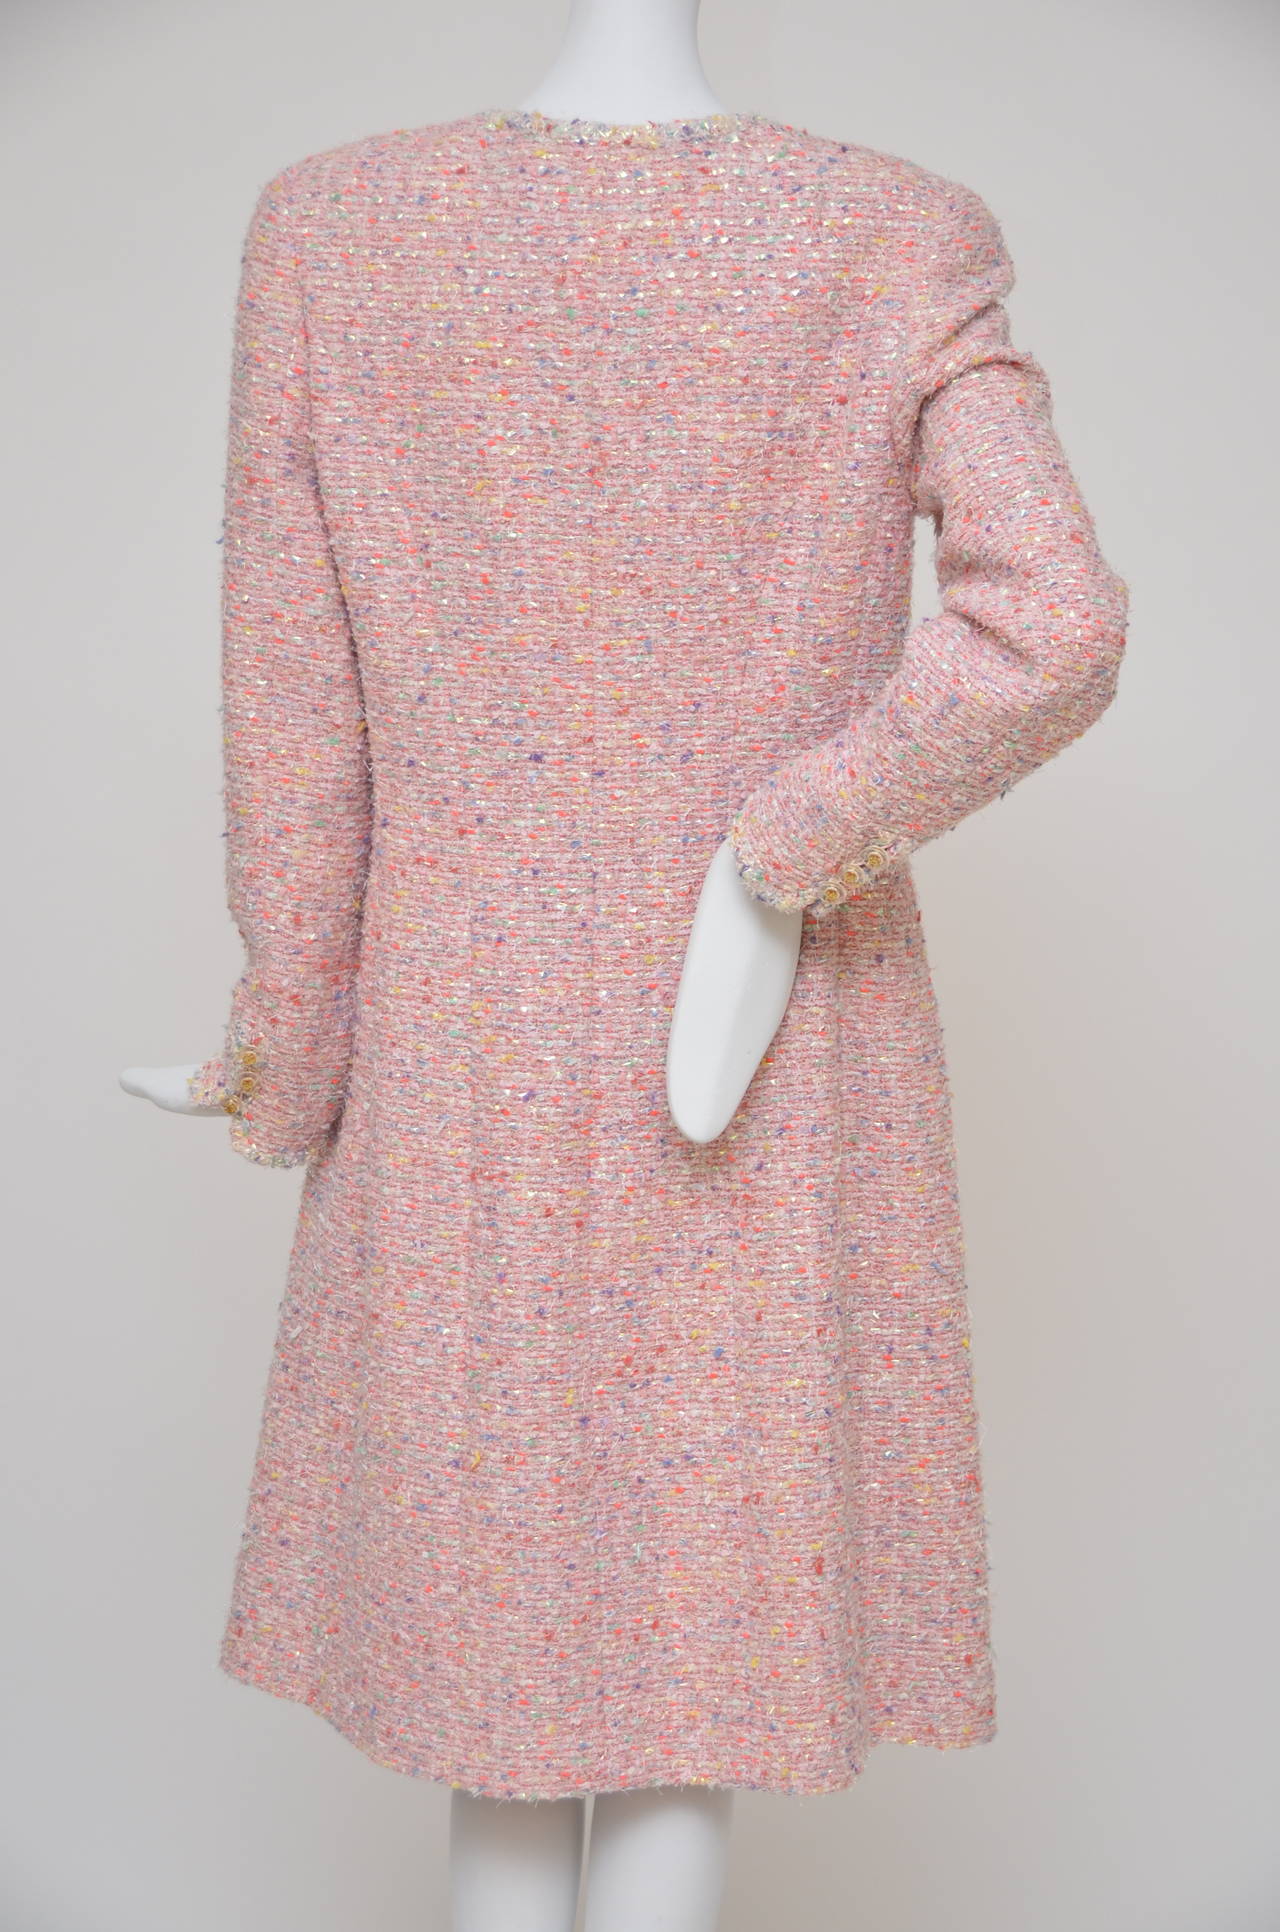 Beautiful chanel pink  coat from 1997 runway.
Boucle fabric  with metallic fibers, round collar, four front flap pockets and front CC button closure. 
Measurements: Bust 36”, Waist 34”, Shoulder 16.5”, Length 40”
Fabric Content: 45% Cotton, 26%